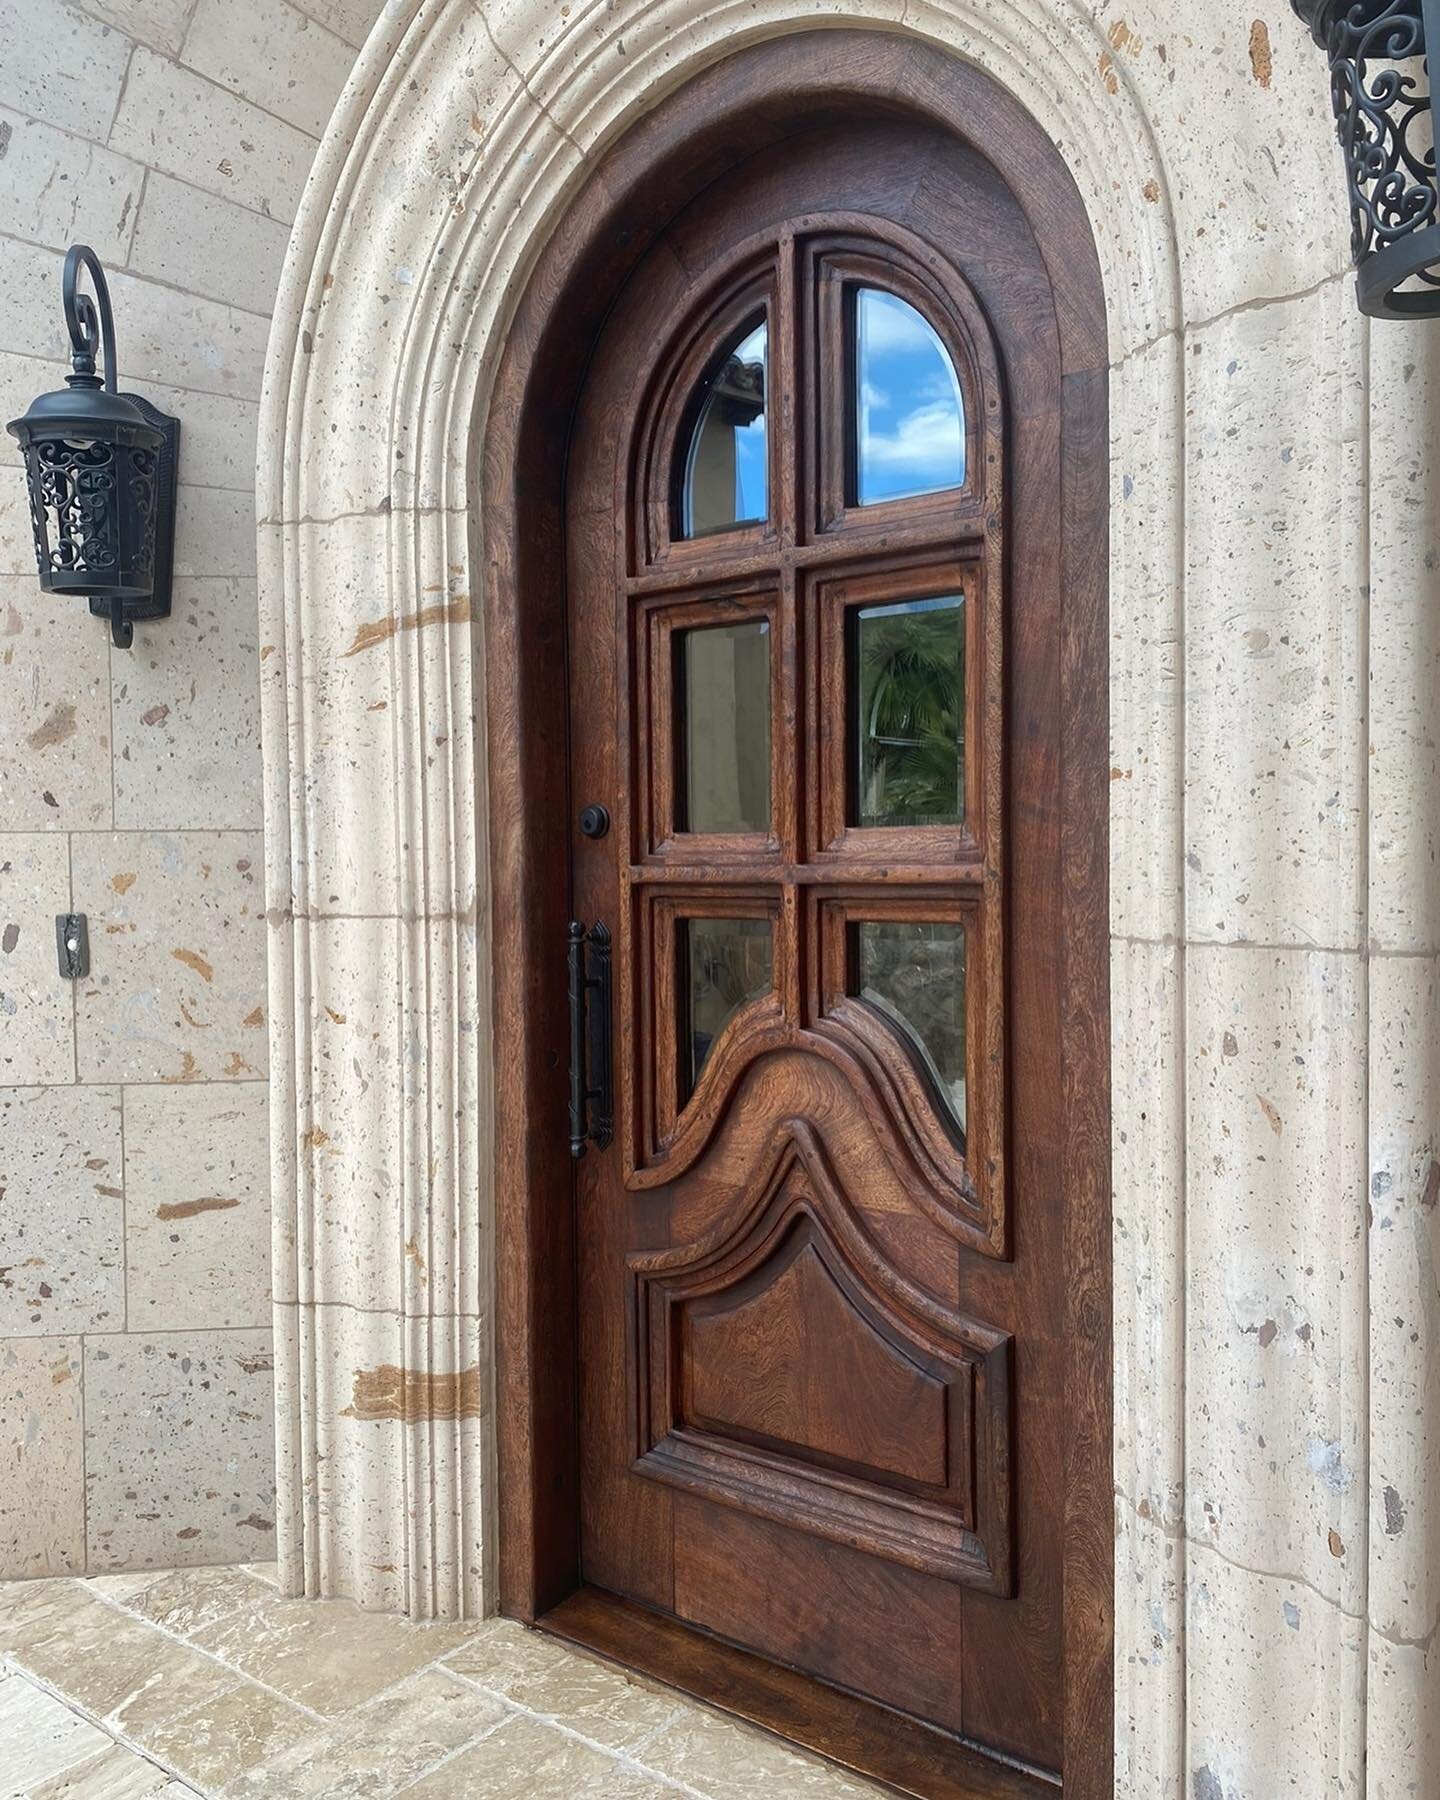 One of a kind &amp; handcrafted entry doors.
#customdoors #entrydoor #wooddesign #exteriordesign #customhomes #luxuryhomes #arizonaliving #architecture